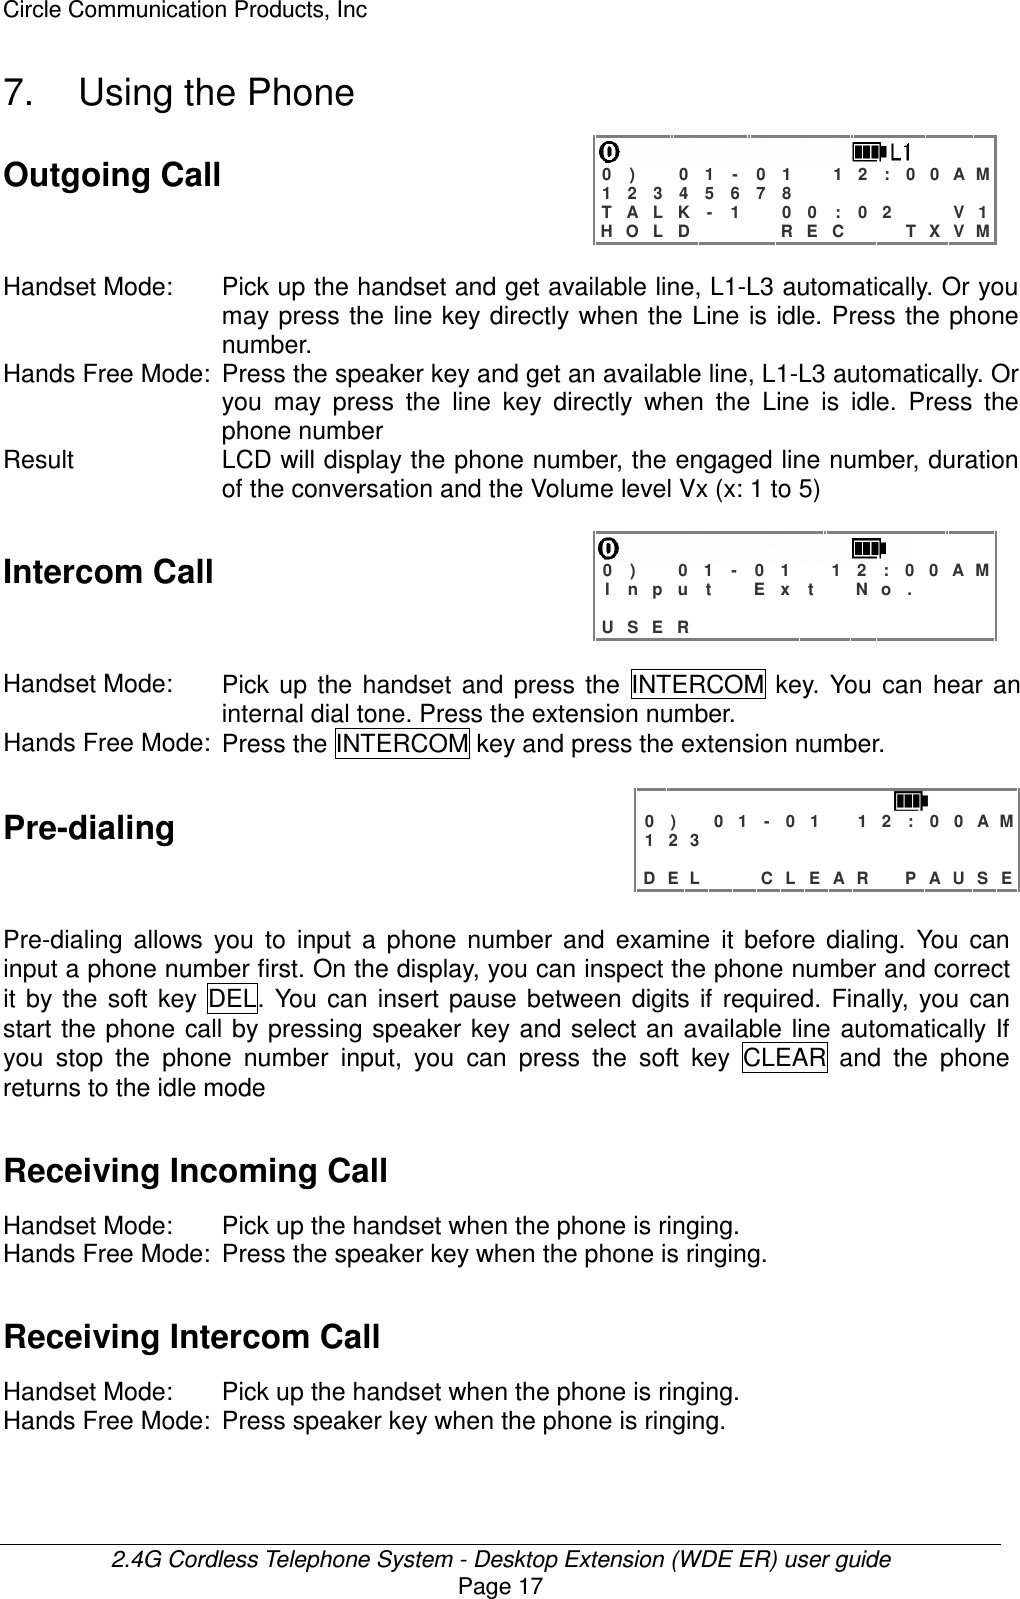 Circle Communication Products, Inc  2.4G Cordless Telephone System - Desktop Extension (WDE ER) user guide Page 17 7.  Using the Phone Outgoing Call   0 )   0 1 - 0 1  1 2 : 0 0 A M 1 2 3 4 5 6 7 8         T A L K - 1  0 0 : 0 2   V 1 H O L D    R E C   T X V M  Handset Mode:  Pick up the handset and get available line, L1-L3 automatically. Or you may press the line key directly when  the Line is idle. Press the phone number. Hands Free Mode: Press the speaker key and get an available line, L1-L3 automatically. Or you  may  press  the  line  key  directly  when  the  Line  is  idle.  Press  the phone number Result LCD will display the phone number, the engaged line number, duration of the conversation and the Volume level Vx (x: 1 to 5)  Intercom Call   0 )   0 1  - 0 1  1 2 : 0 0 A M I n p u t  E x t  N o .                    U S E R              Handset Mode:  Pick  up  the  handset  and  press  the  INTERCOM  key.  You  can  hear  an internal dial tone. Press the extension number.   Hands Free Mode: Press the INTERCOM key and press the extension number.  Pre-dialing    0 )   0 1 - 0 1  1 2 : 0 0 A M 1 2 3                              D E L   C L E A R  P A U S E Pre-dialing  allows  you  to  input  a  phone  number  and  examine  it  before  dialing.  You  can input a phone number first. On the display, you can inspect the phone number and correct it  by  the  soft  key  DEL.  You  can  insert  pause  between  digits if  required.  Finally,  you  can start the phone call by pressing speaker key and select  an  available line  automatically If you  stop  the  phone  number  input,  you  can  press  the  soft  key  CLEAR  and  the  phone returns to the idle mode Receiving Incoming Call  Handset Mode:  Pick up the handset when the phone is ringing. Hands Free Mode: Press the speaker key when the phone is ringing.  Receiving Intercom Call  Handset Mode:  Pick up the handset when the phone is ringing. Hands Free Mode: Press speaker key when the phone is ringing.  